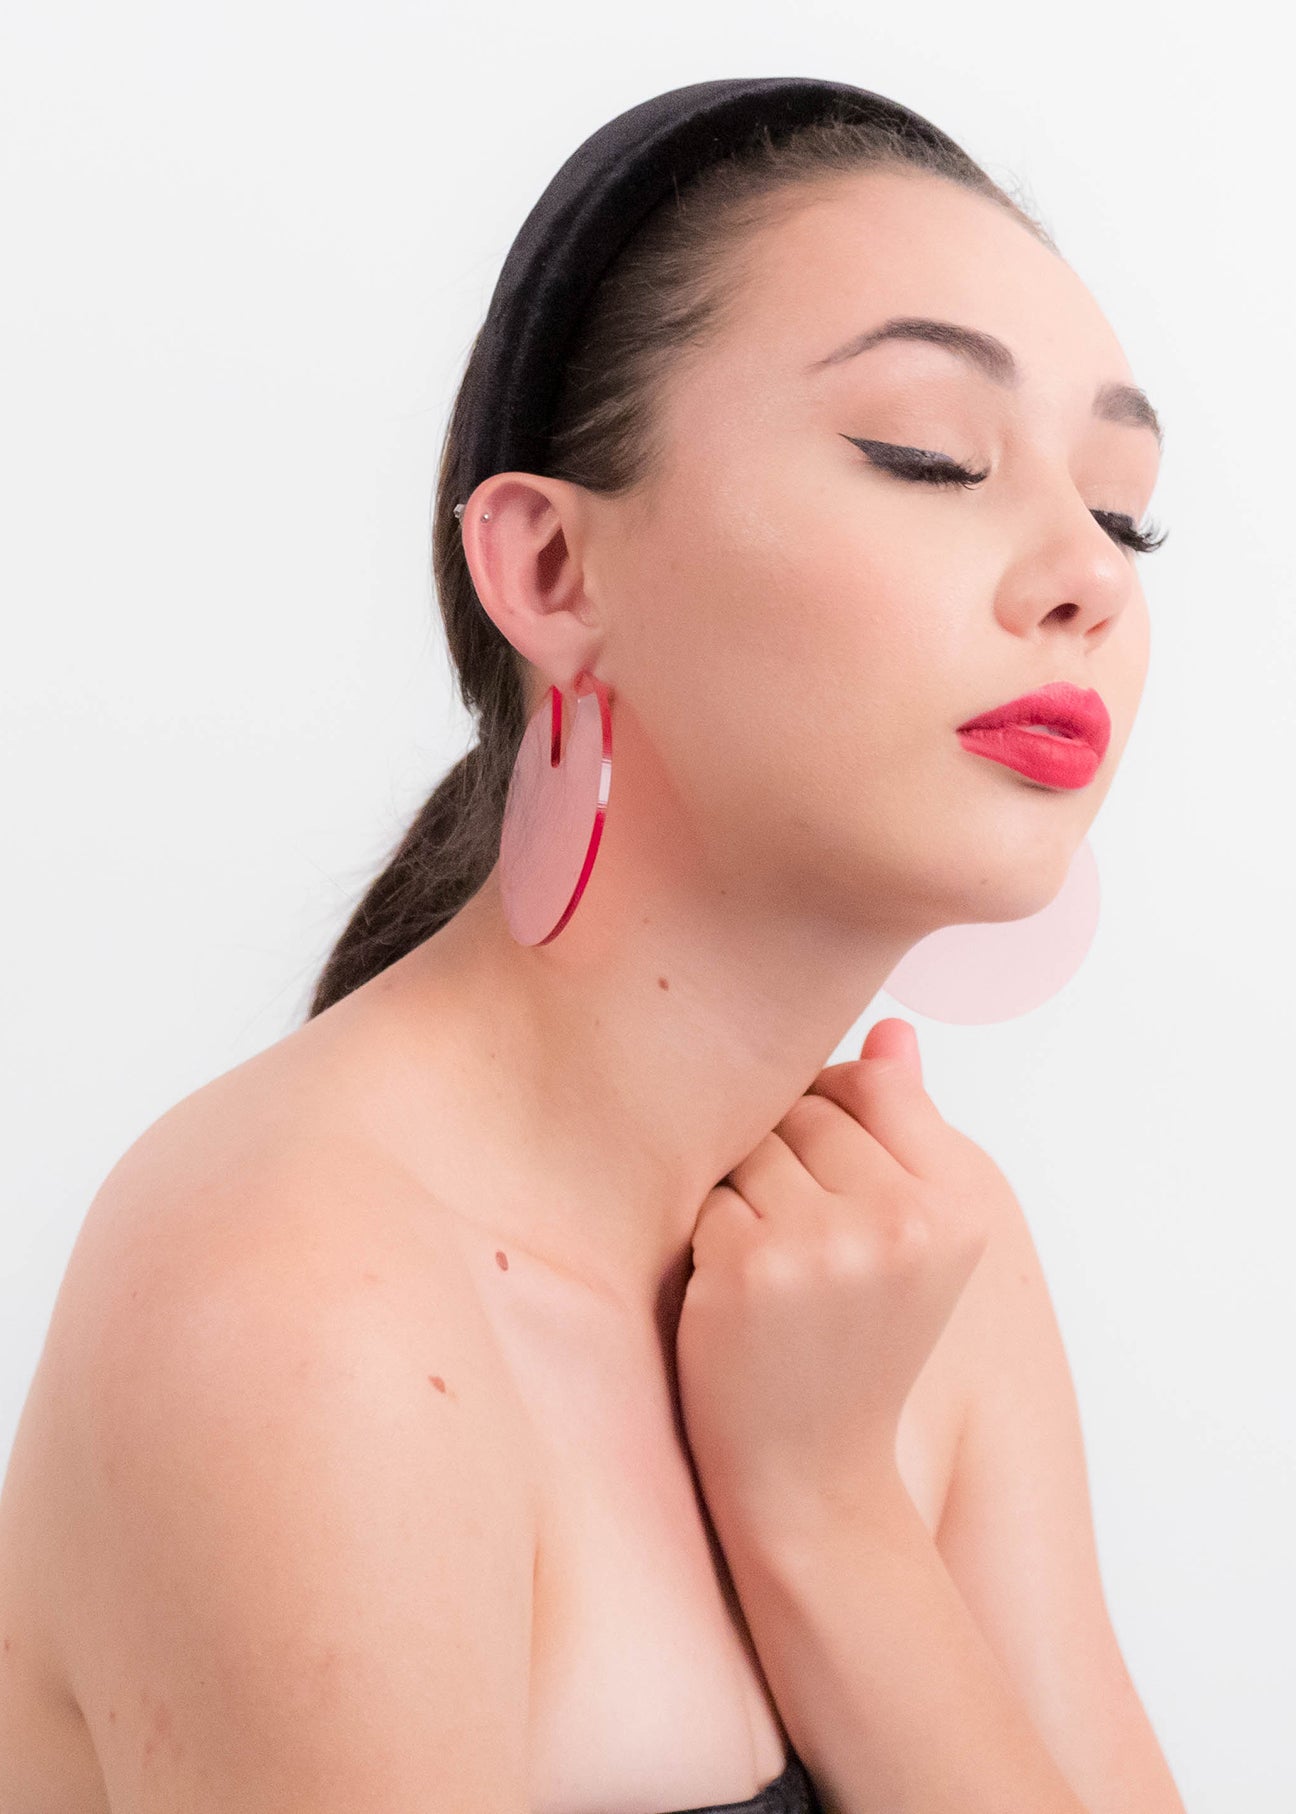 Oversized Statement Lucite Disc Earrings